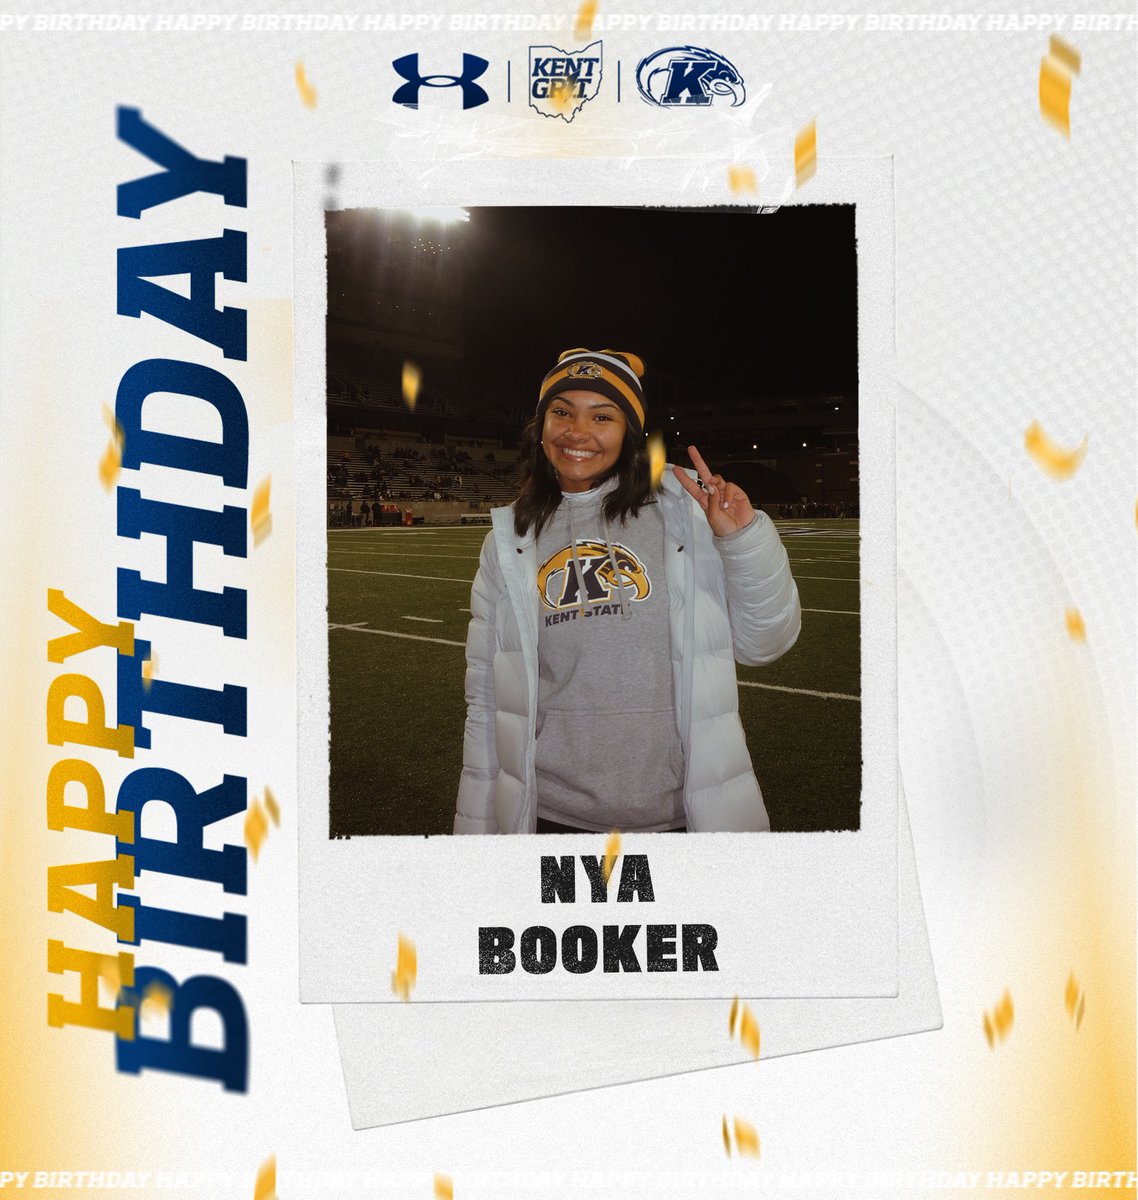 Happy Birthday to our student photographer, @nbooker_33⚡️ #KentGRIT⚡️